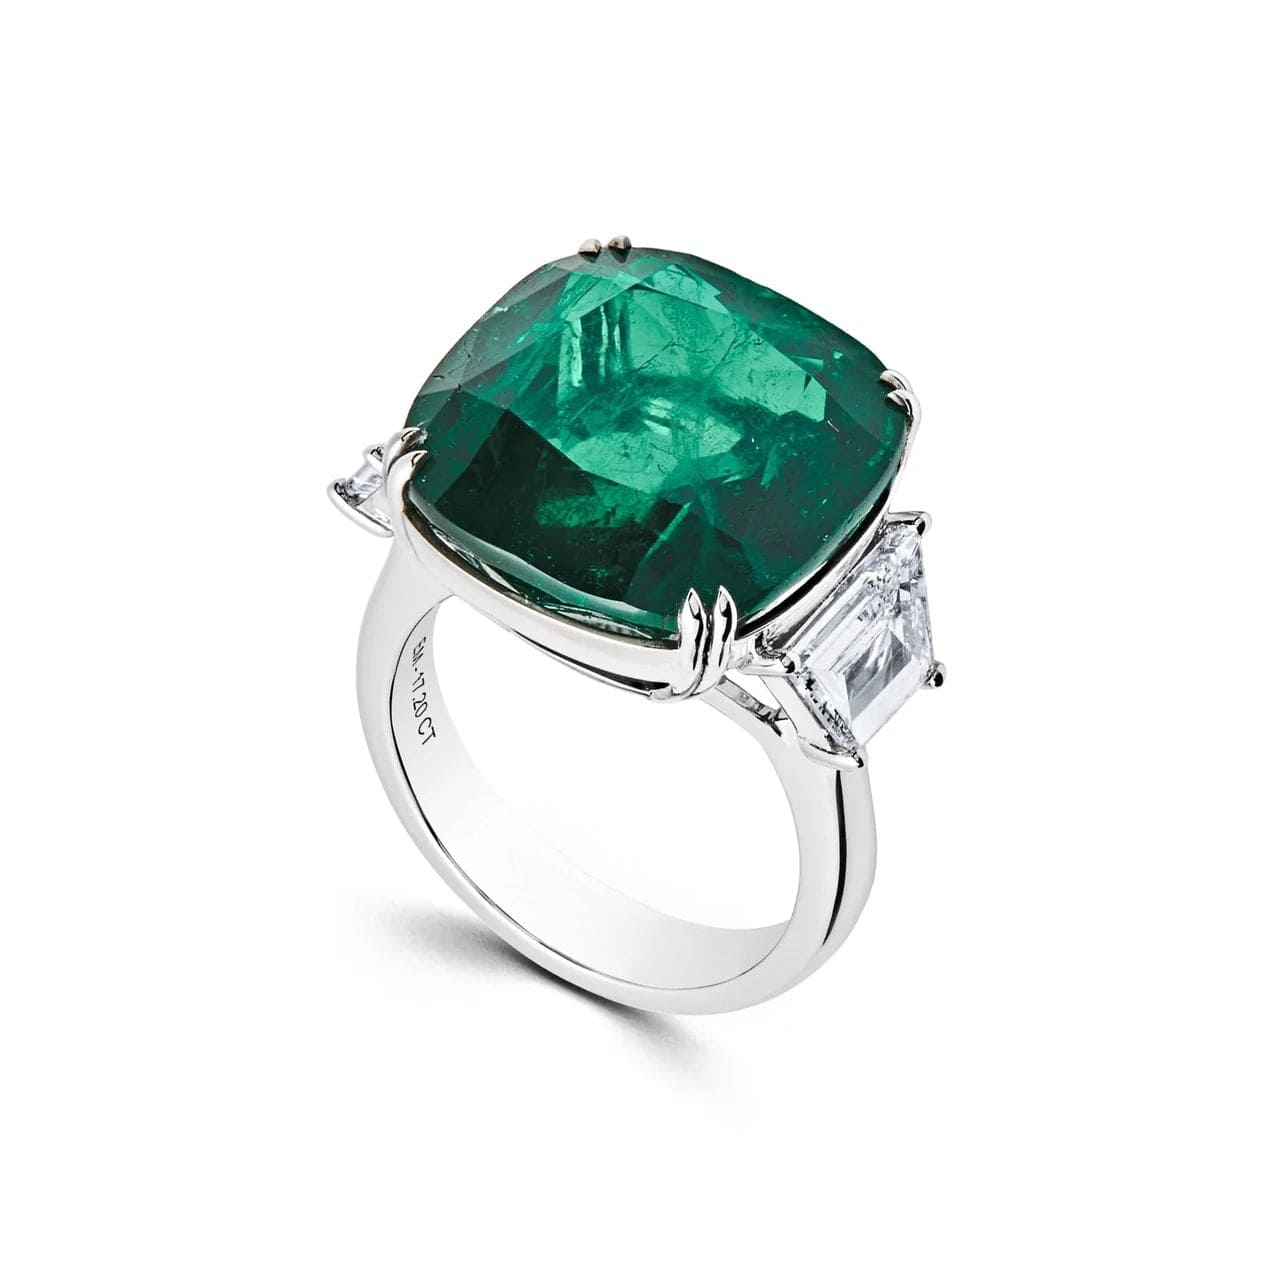 One-of-a-Kind Cushion-Cut Emerald Ring With Diamonds